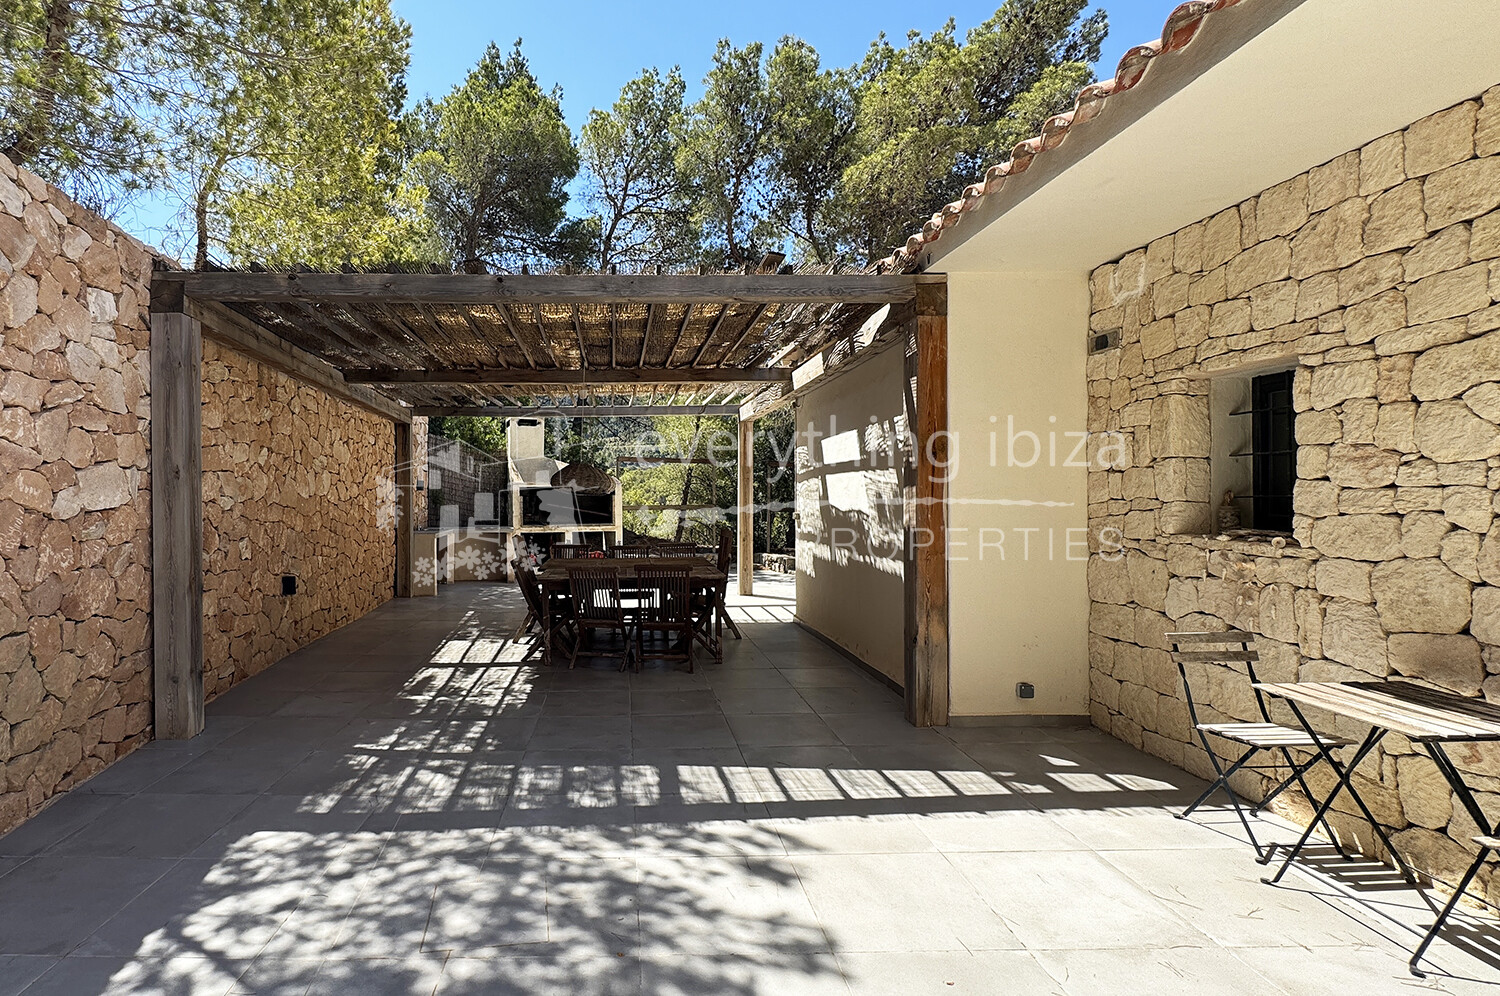 Charming Detached Country Villa Close to the Village of Sant Josep, ref. 1726, for sale in Ibiza by everything ibiza Properties